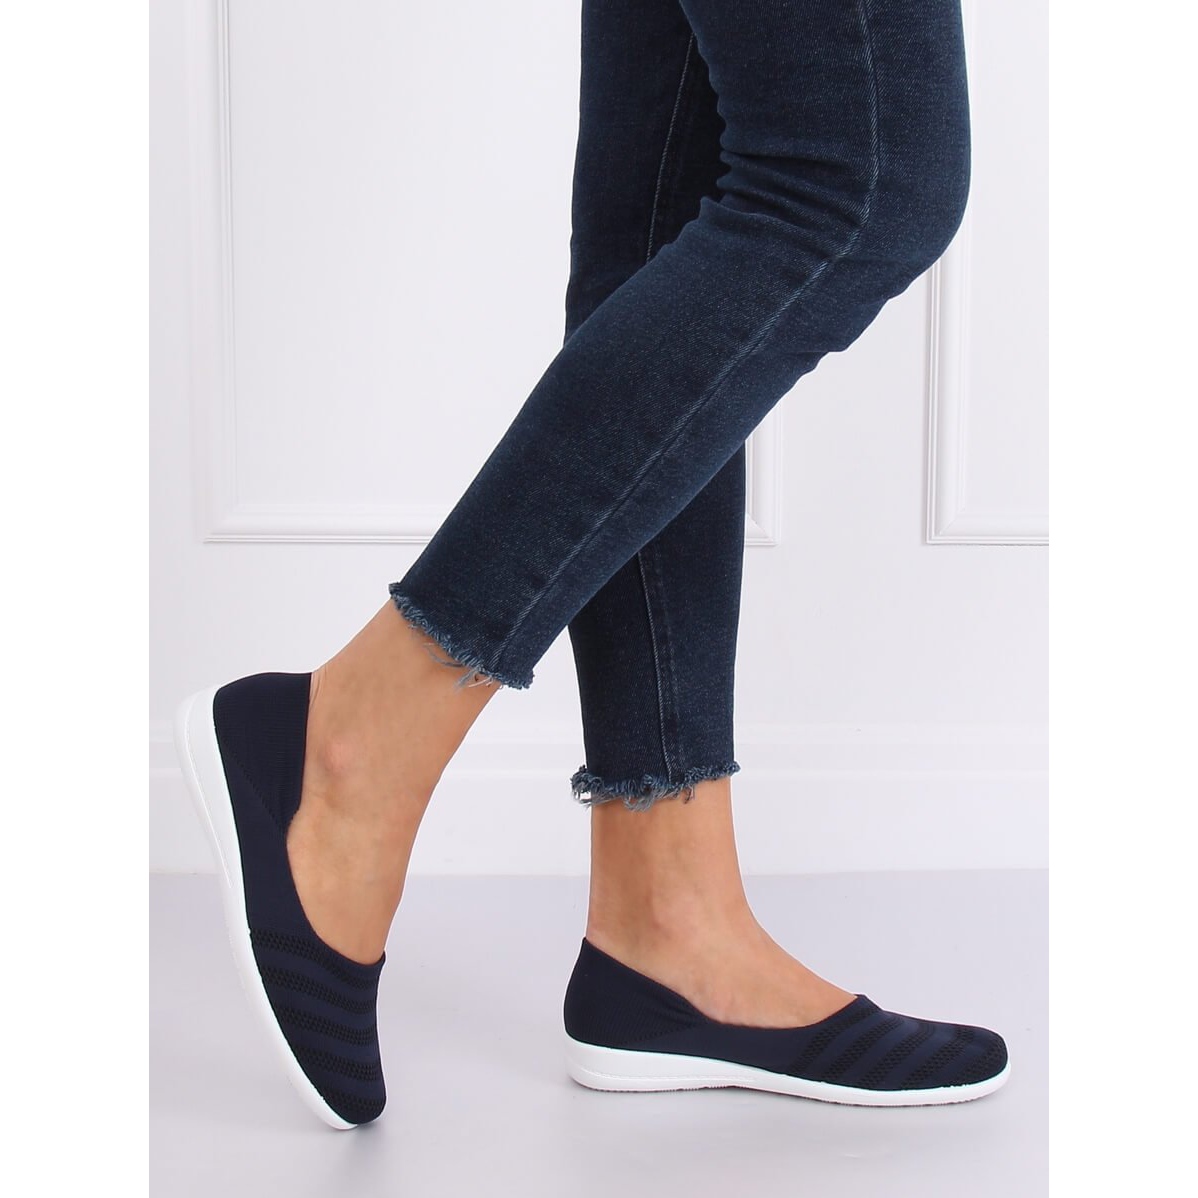 25+ Recommended Best Slip-on Shoes for Women (Newest 2021) – Style Female